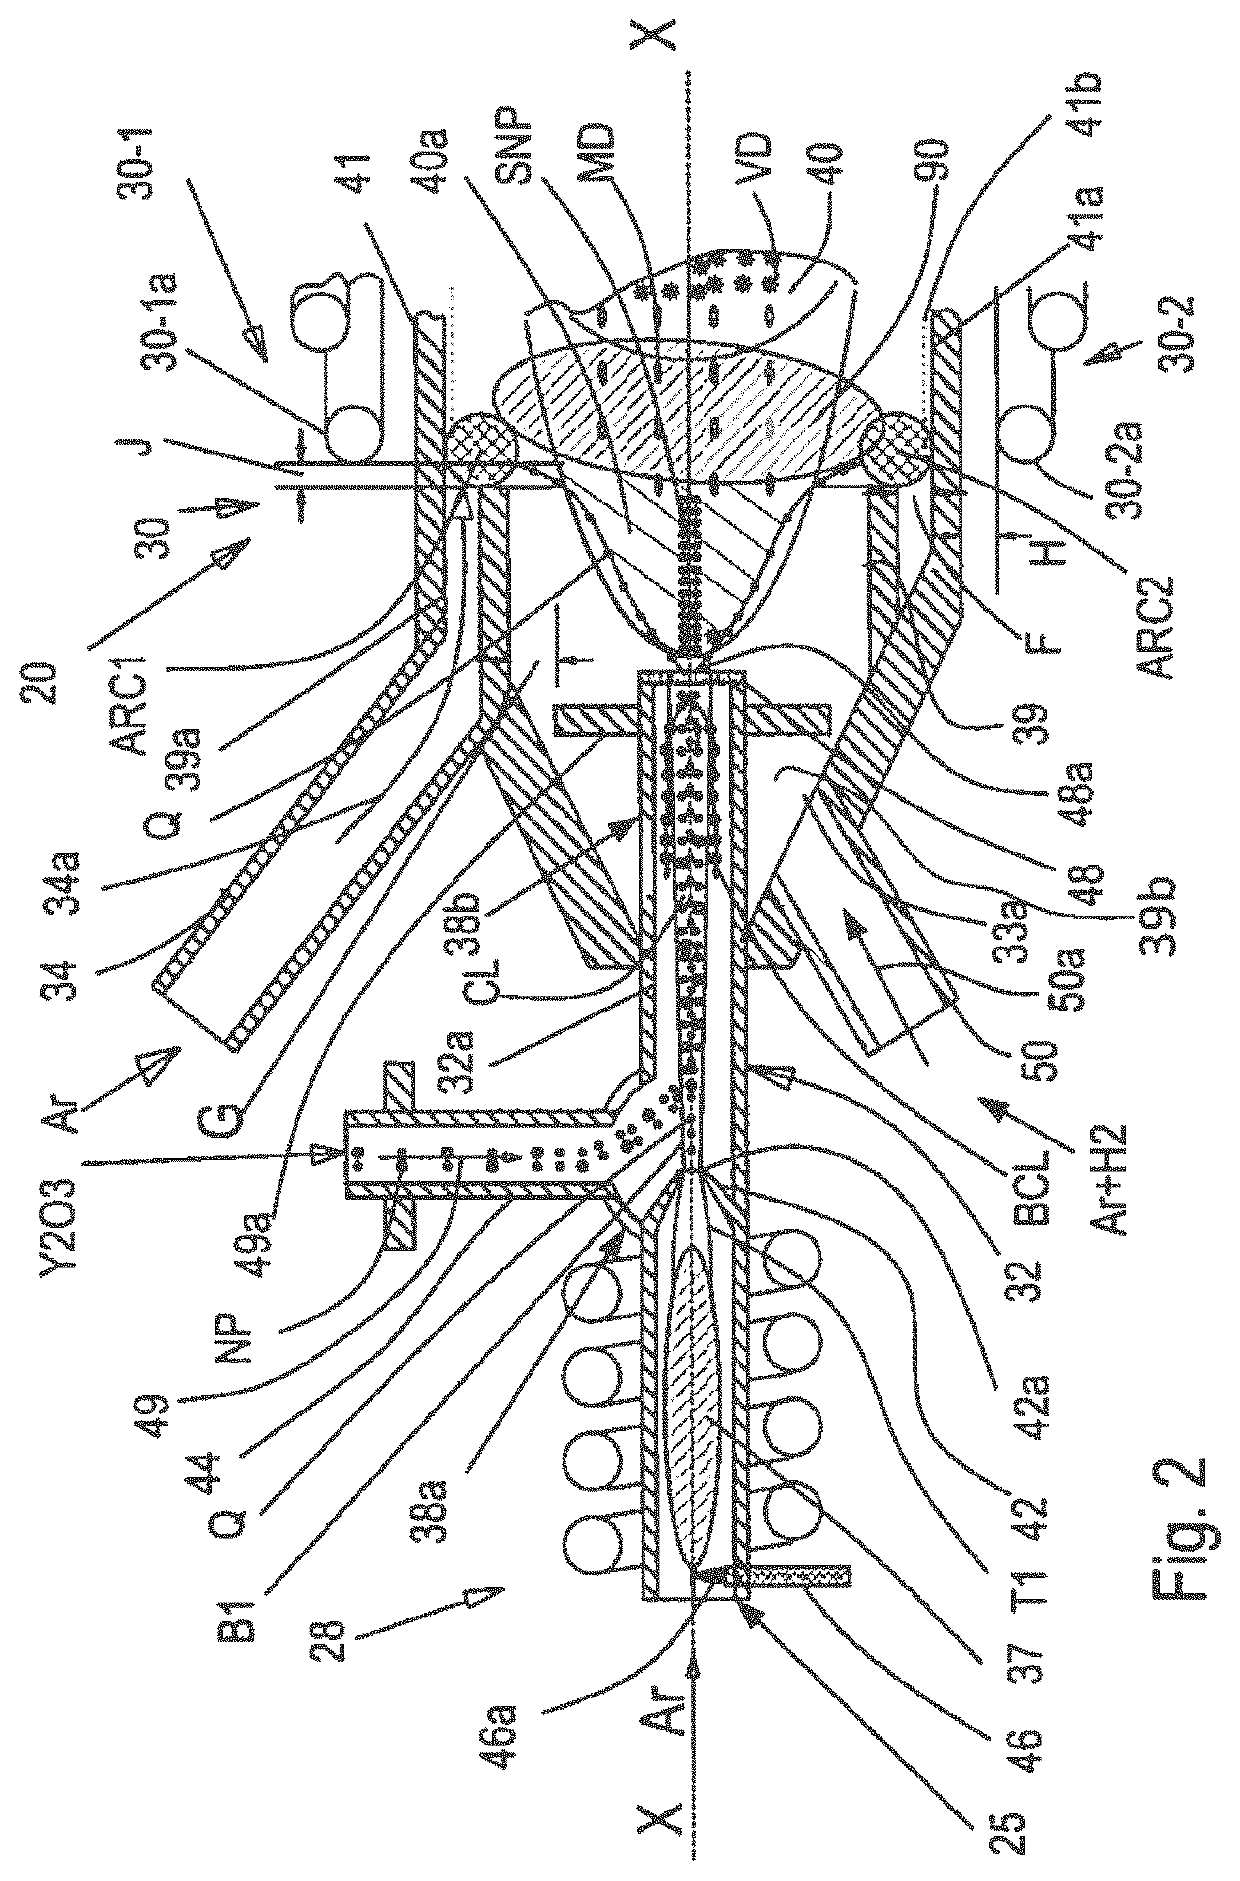 3D printing apparatus using a beam of an atmospheric pressure inductively coupled plasma generator